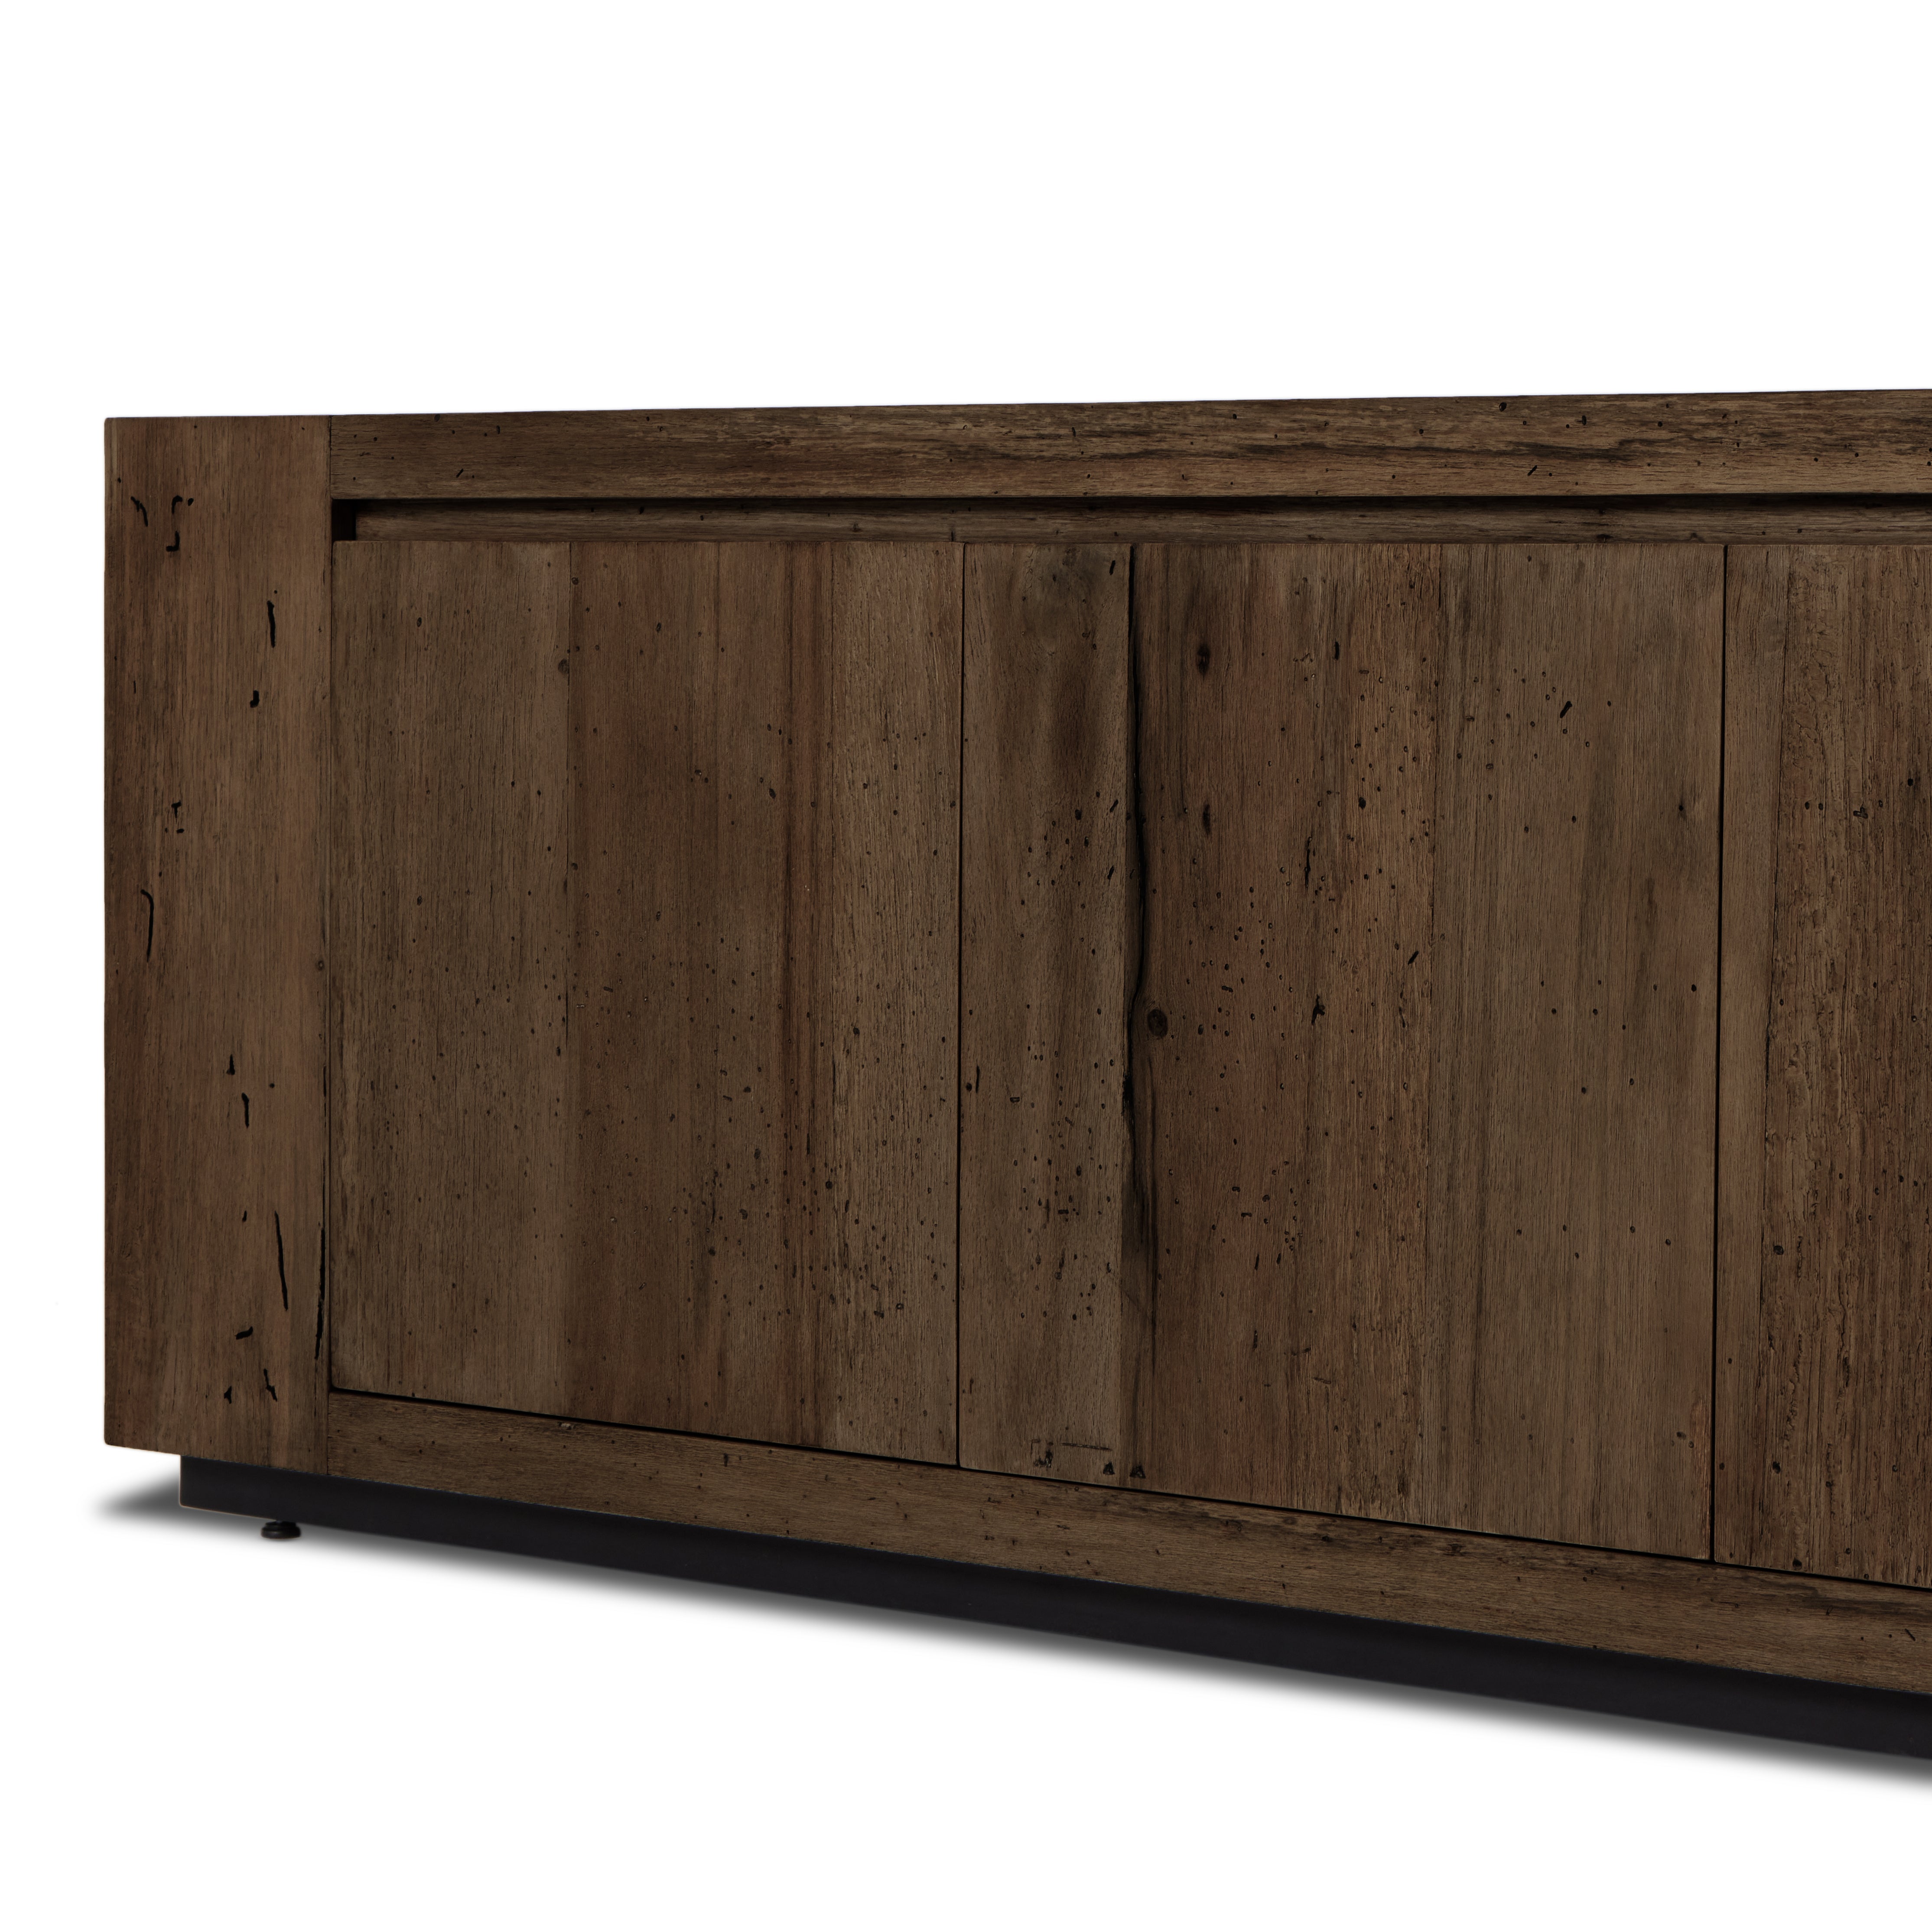 Made from thick-cut oak veneer with a faux rustic finish made to emulate wormwood, this spacious media console features chunky squared legs and dovetail joinery detailing. Amethyst Home provides interior design, new home construction design consulting, vintage area rugs, and lighting in the Miami metro area.